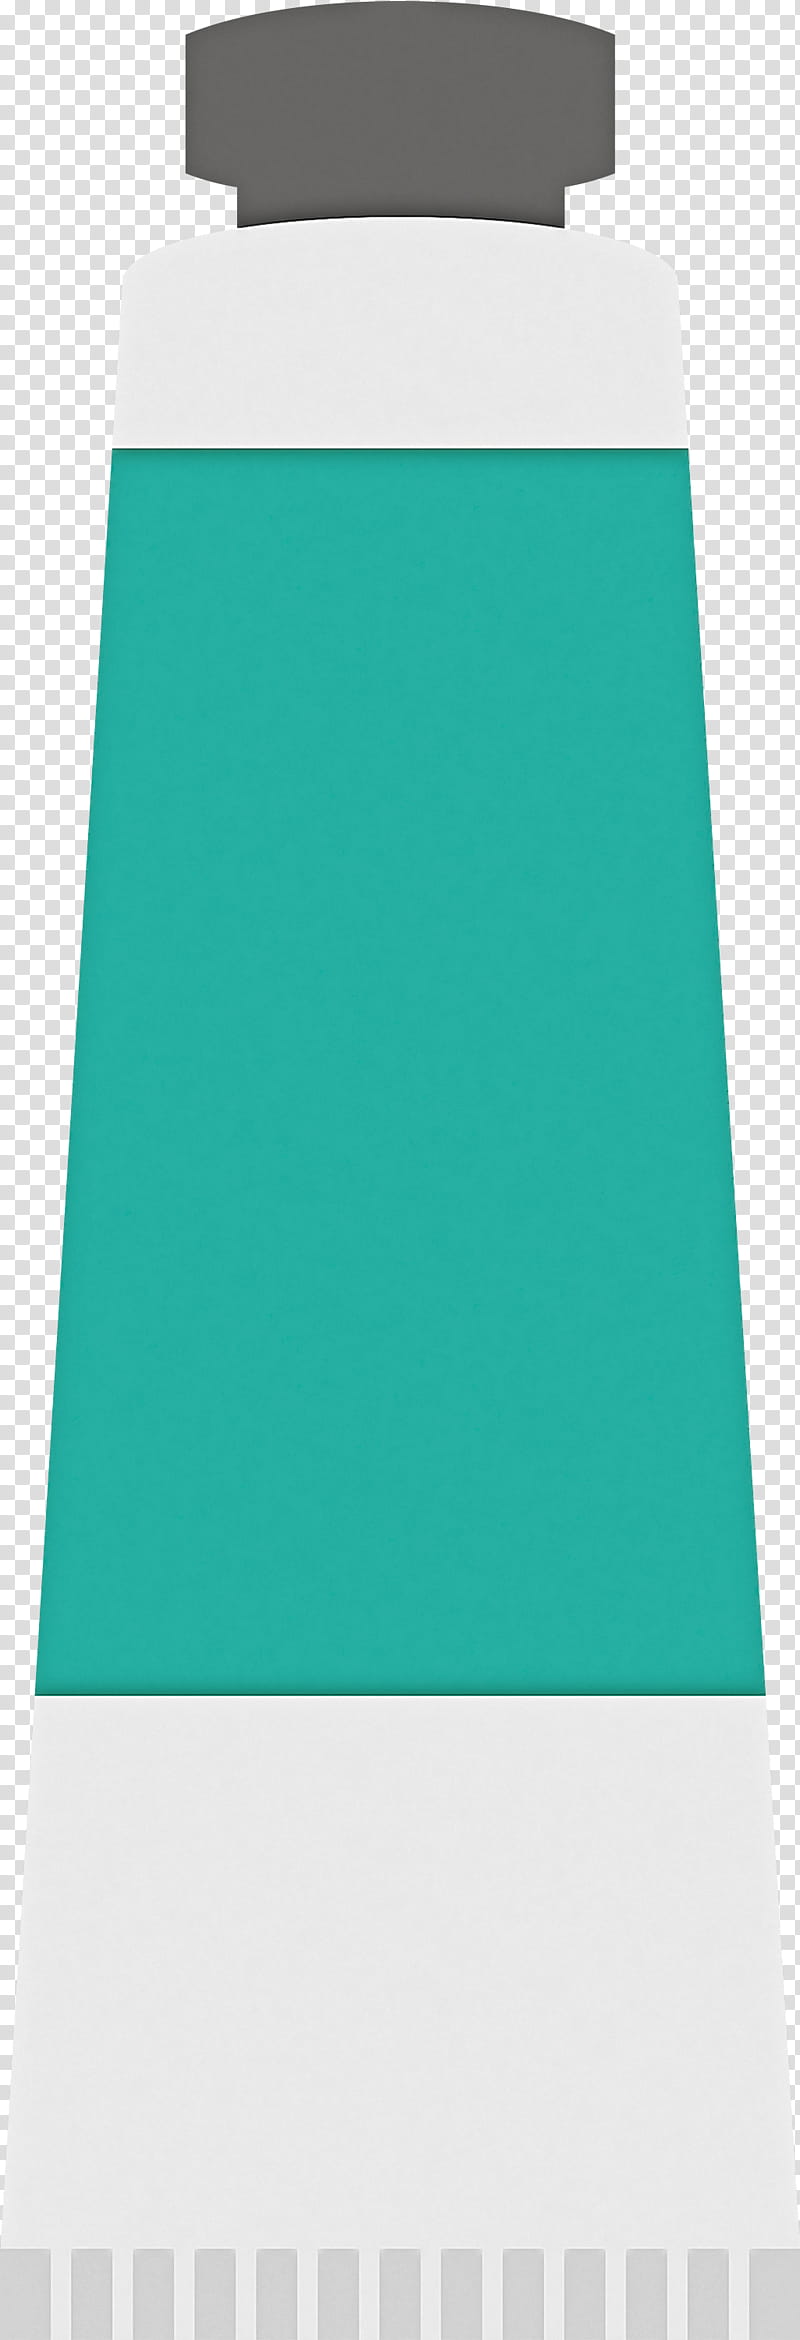 green aqua turquoise blue teal, Paint Tube, Mat, Rectangle transparent background PNG clipart